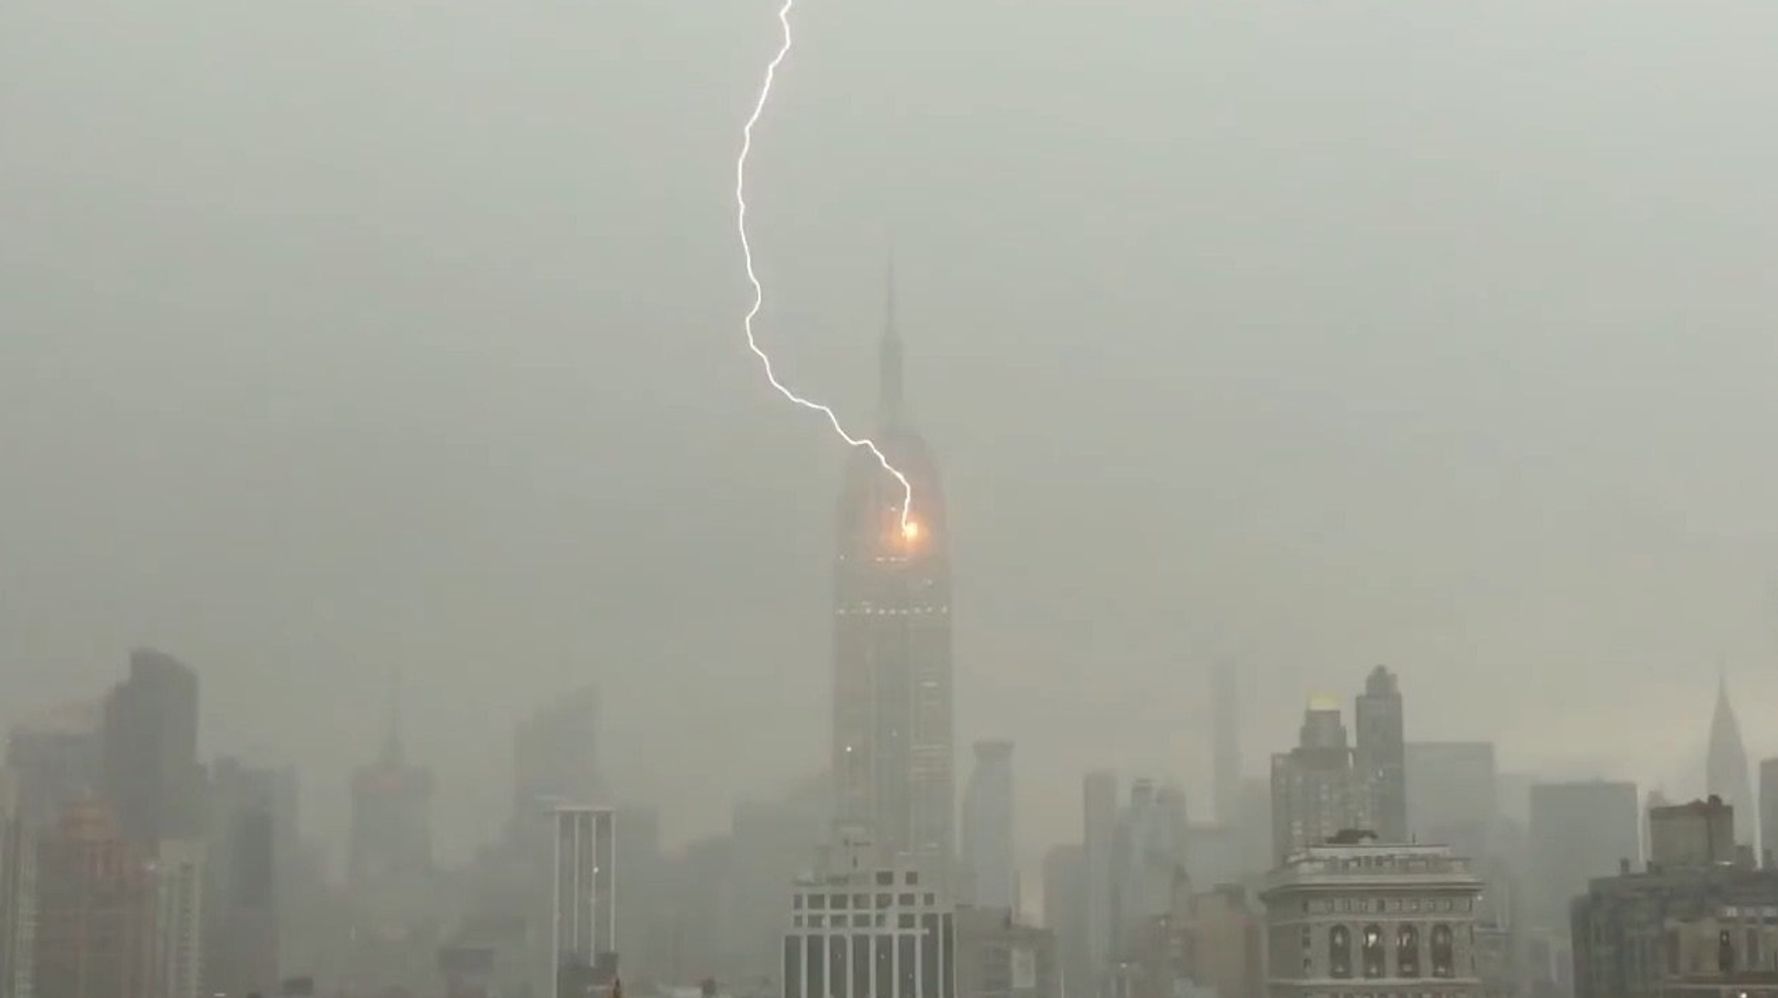 Empire State Building Struck By Lightning In Dramatic TimeLapse Video